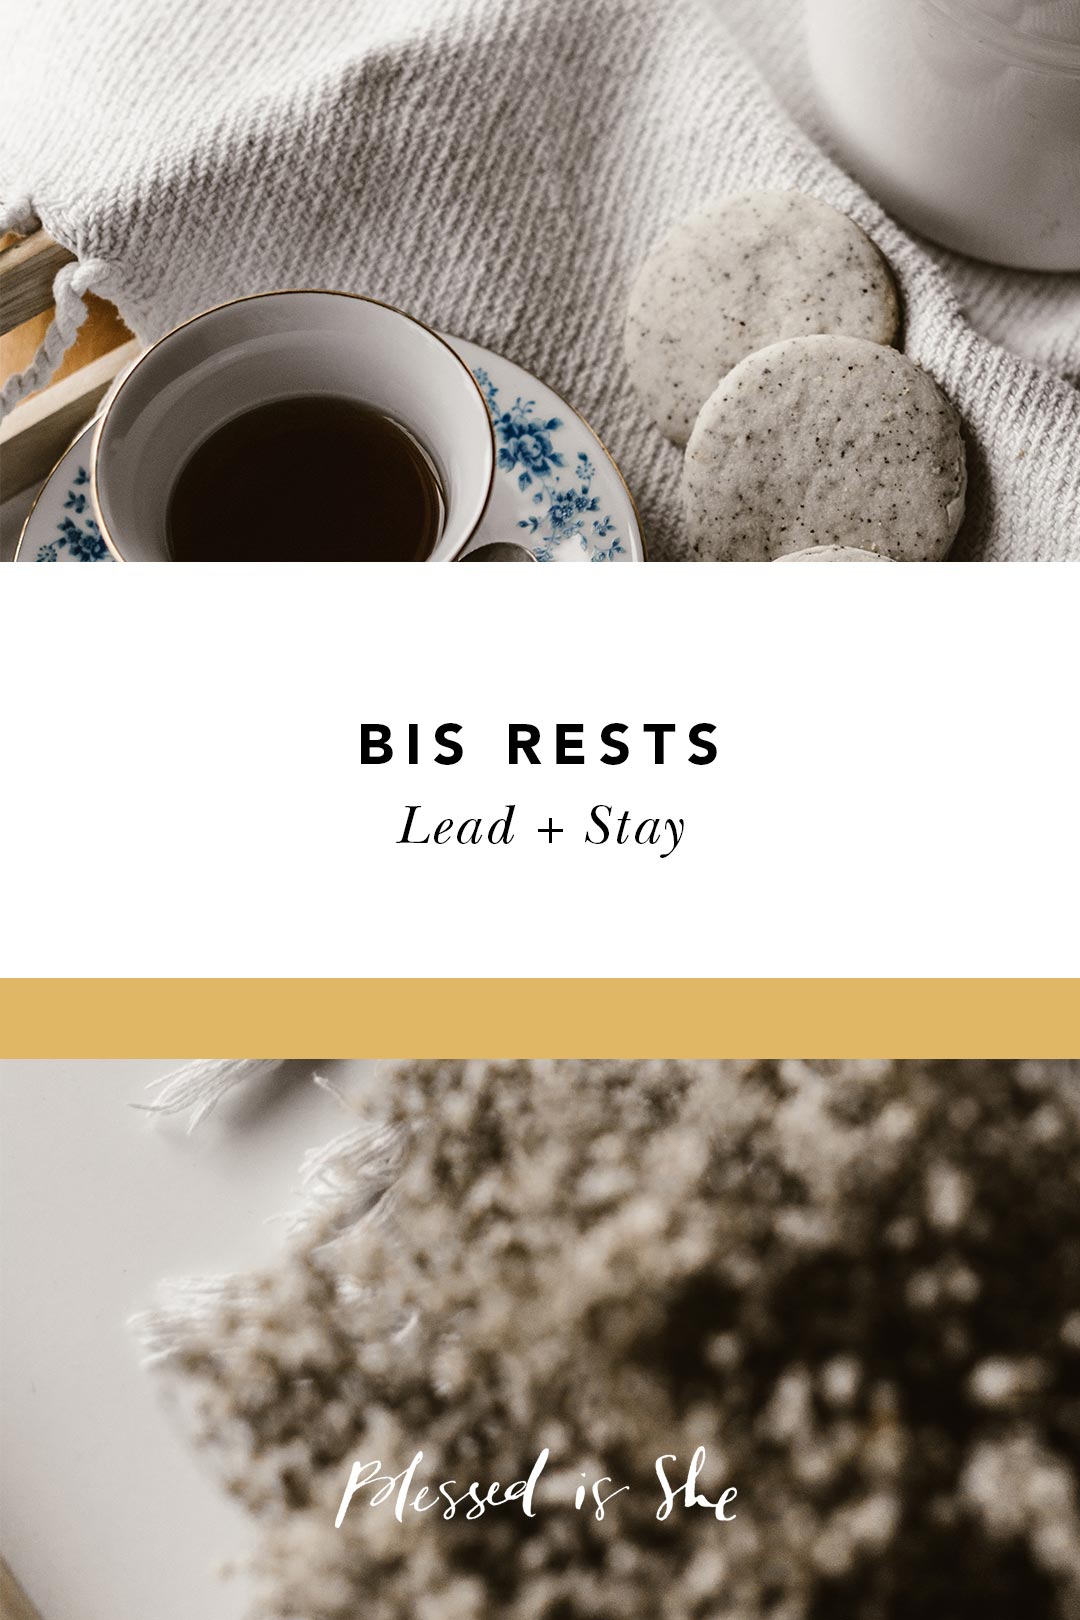 bis rests lead + stay